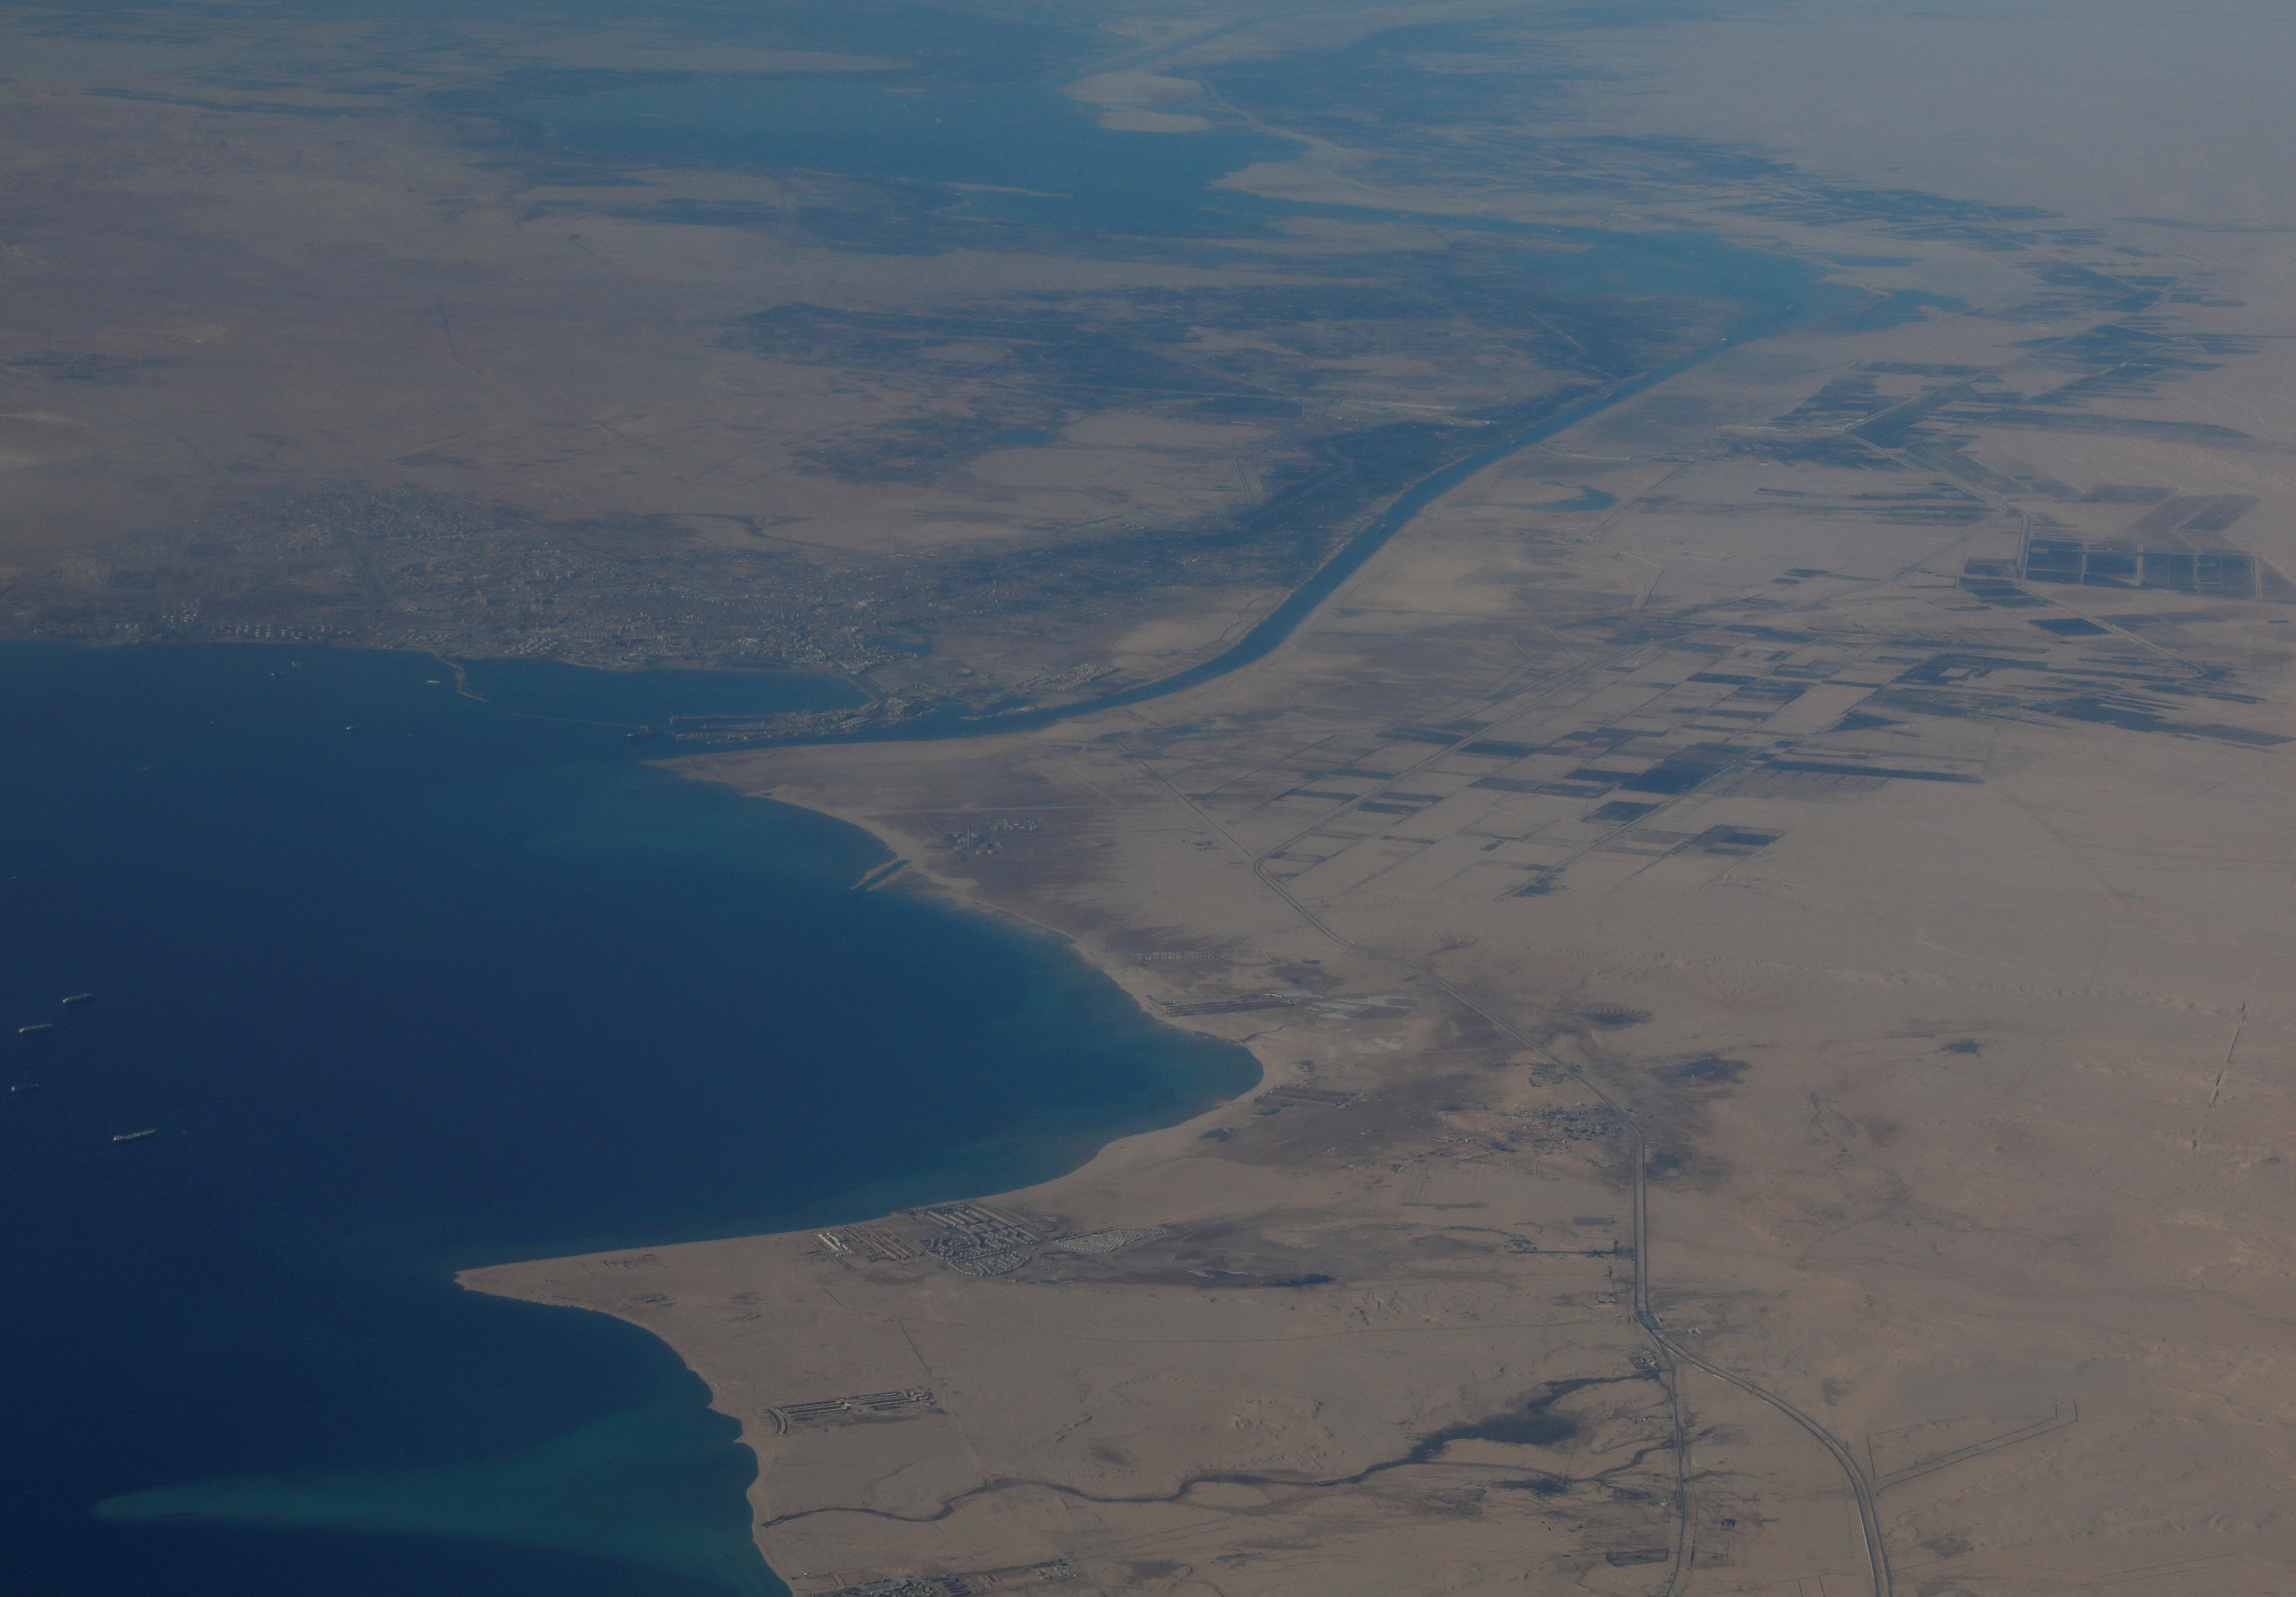 An aerial view of the Gulf of Suez and the Suez Canal are pictured through the window of an airplane